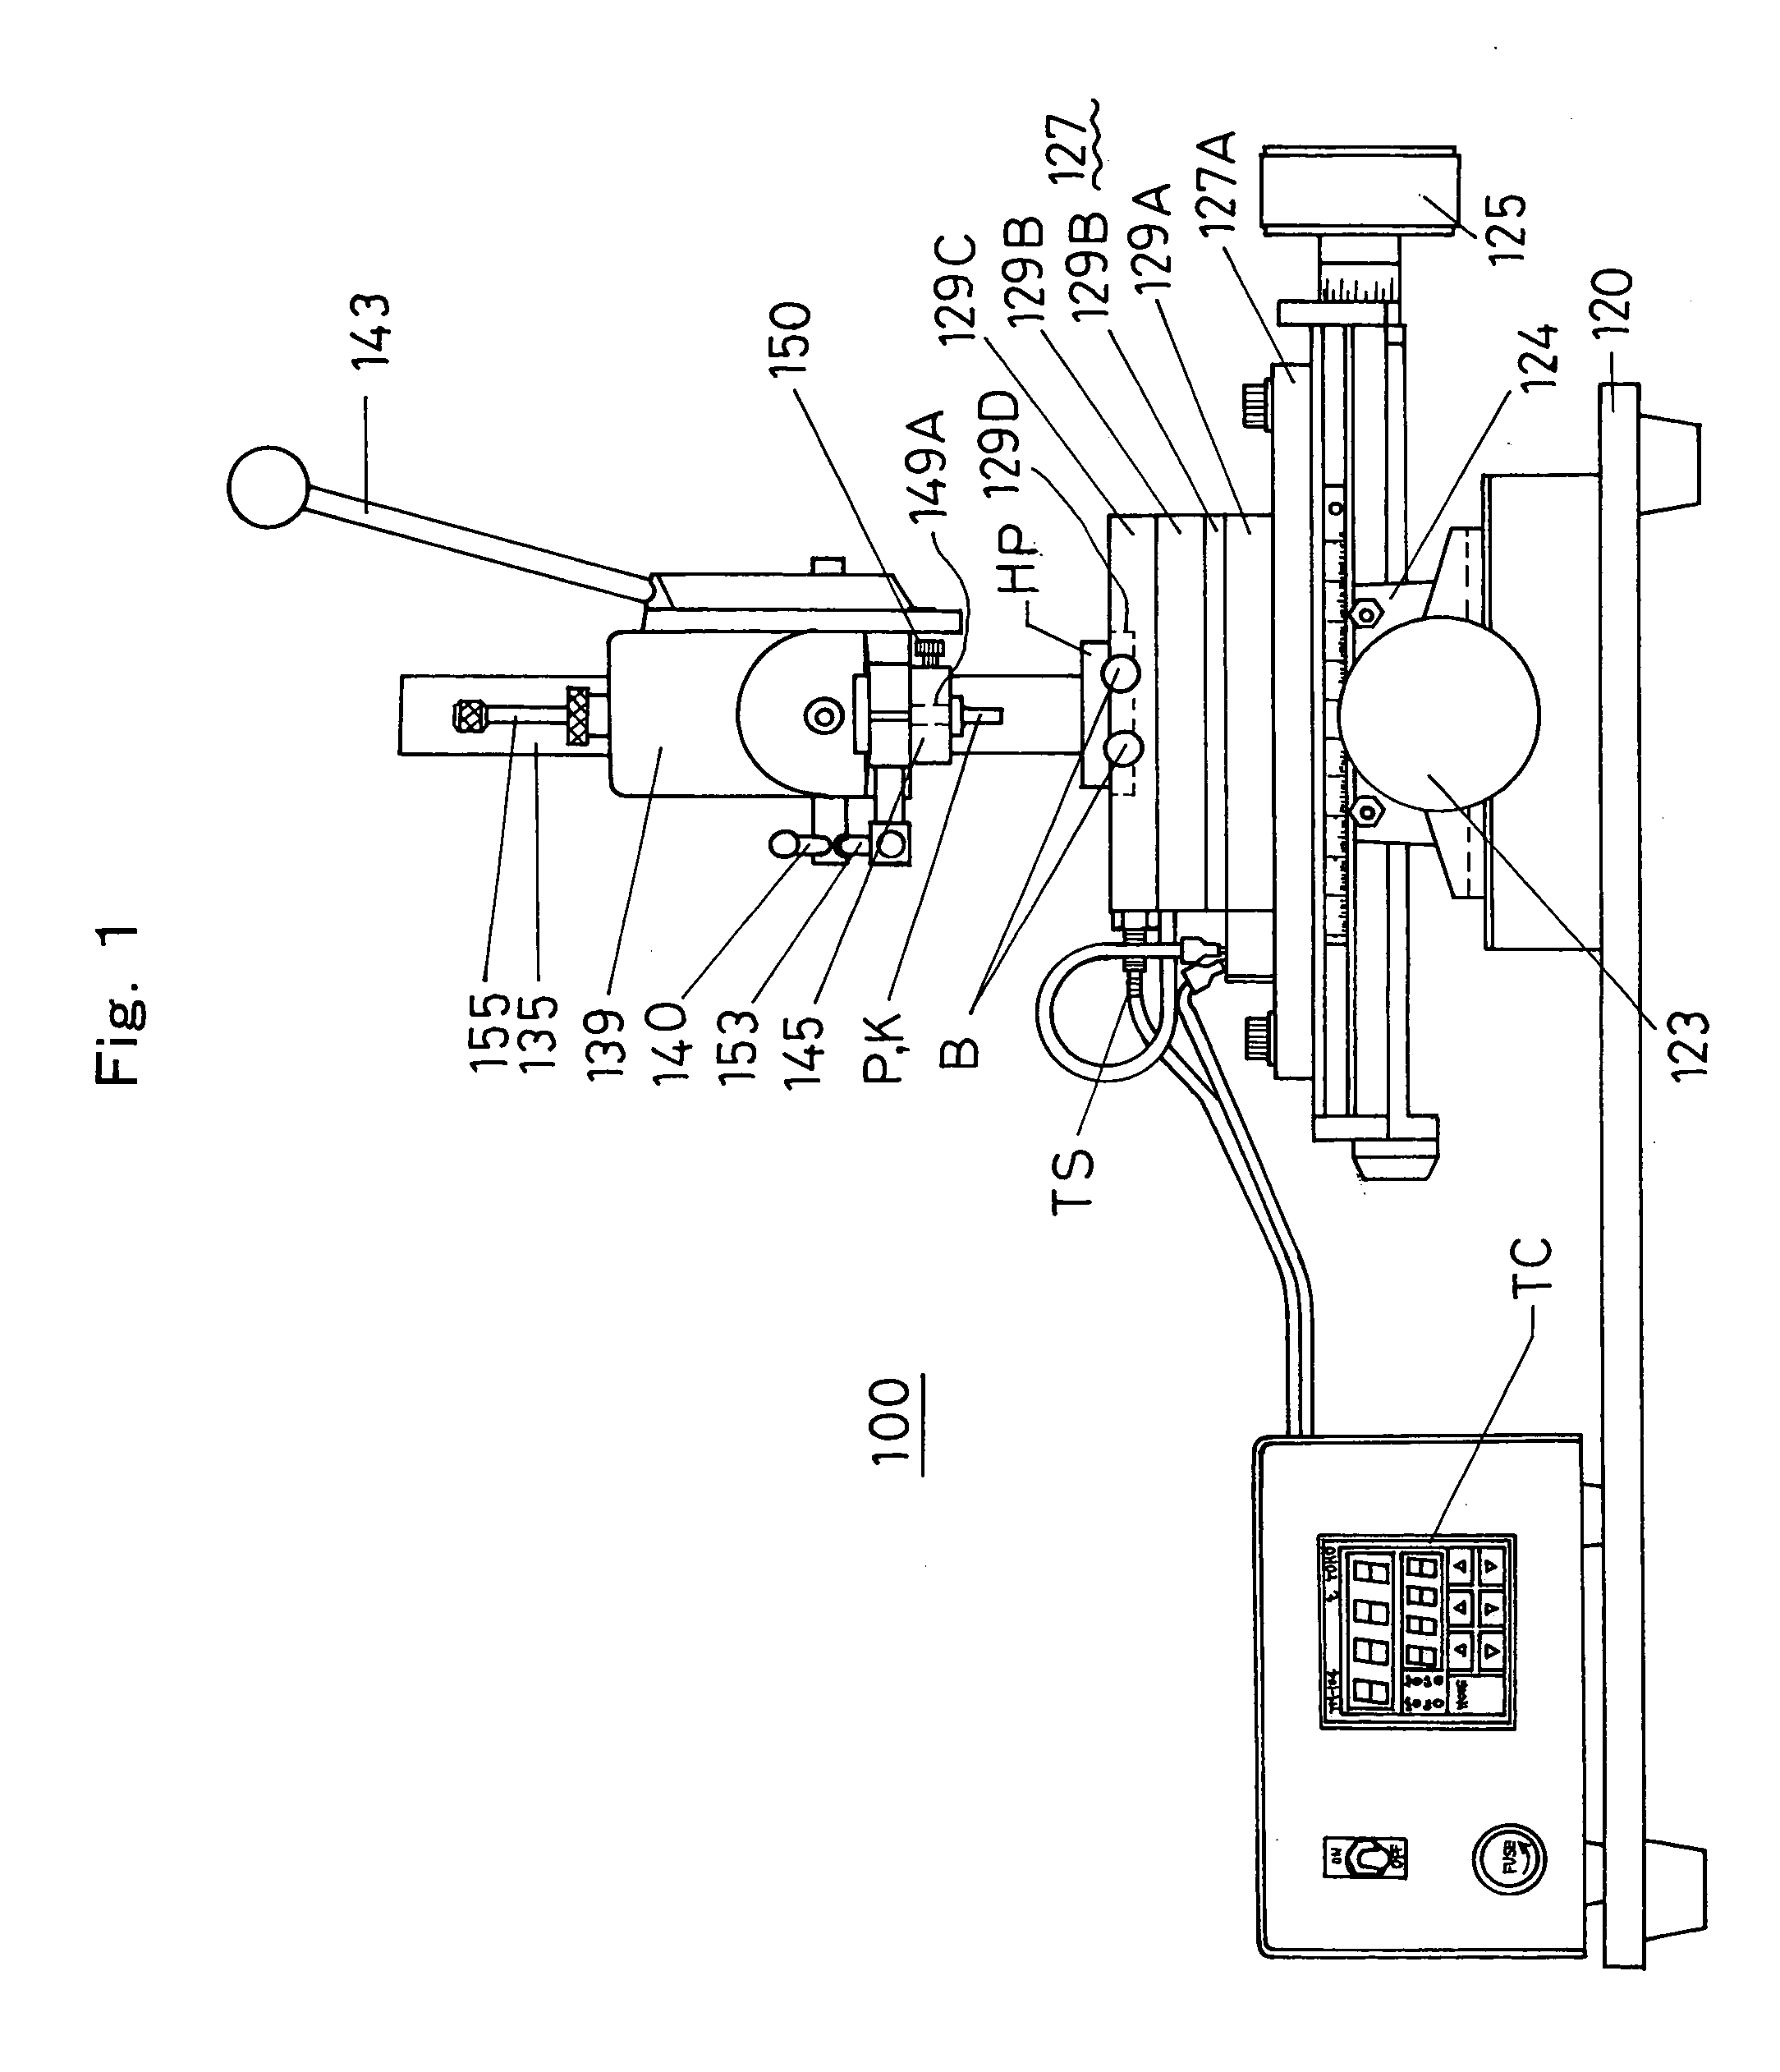 Method for constructing array blocks, and tissue punching instrument and tissue blocks used therefor